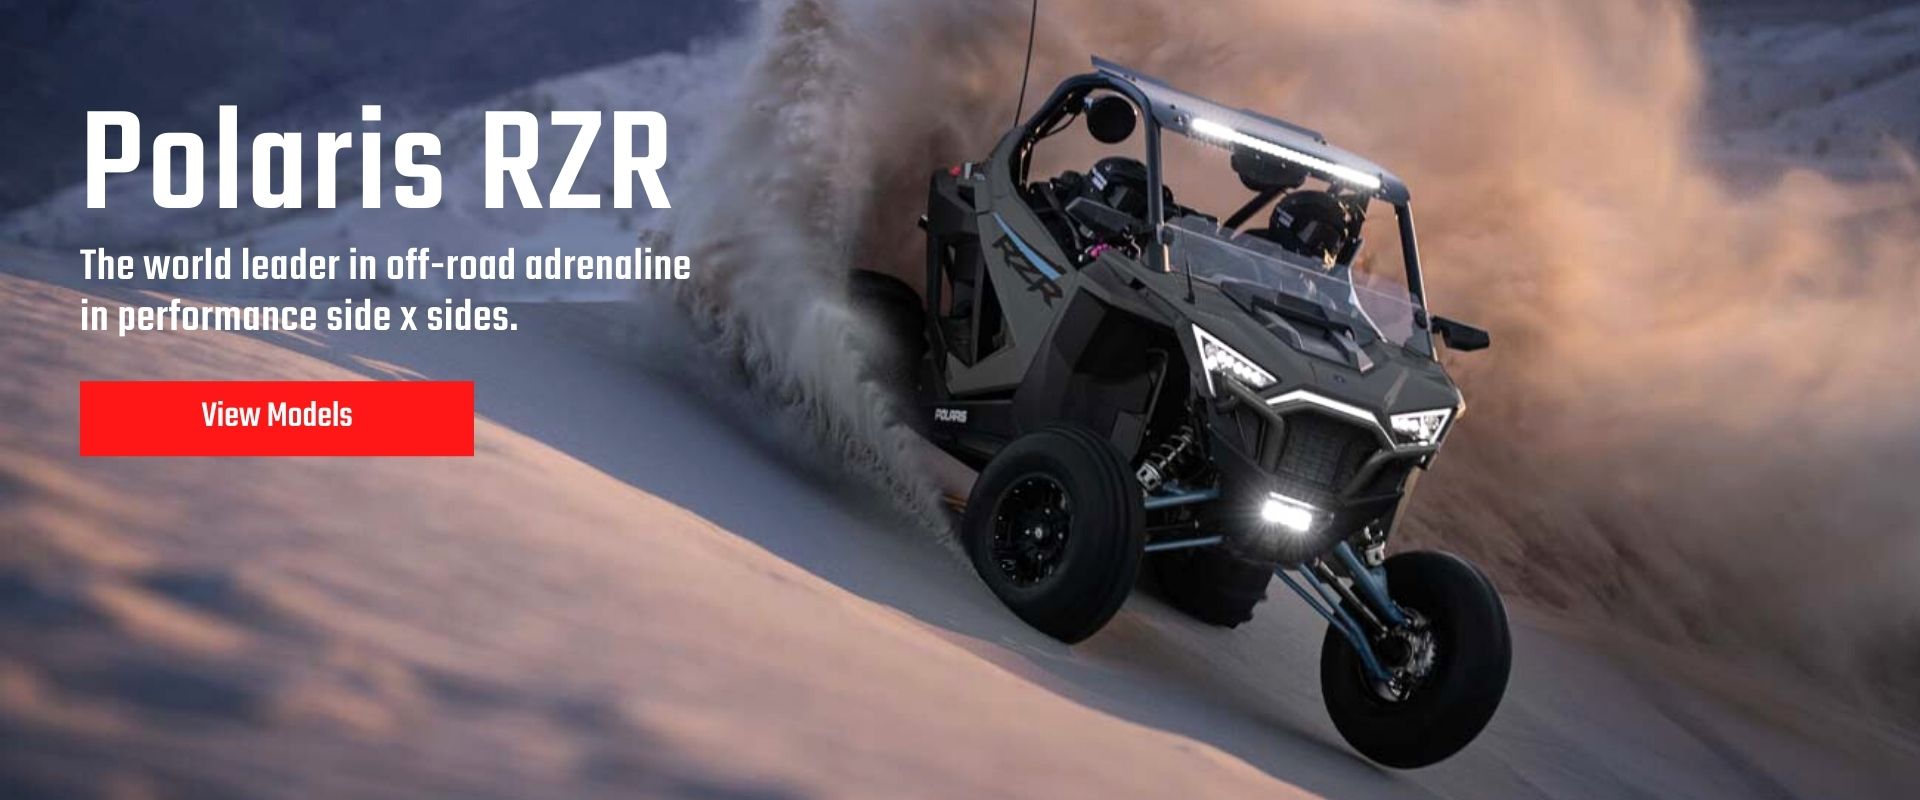 The world leader in off-road adrenaline in performance side x sides.